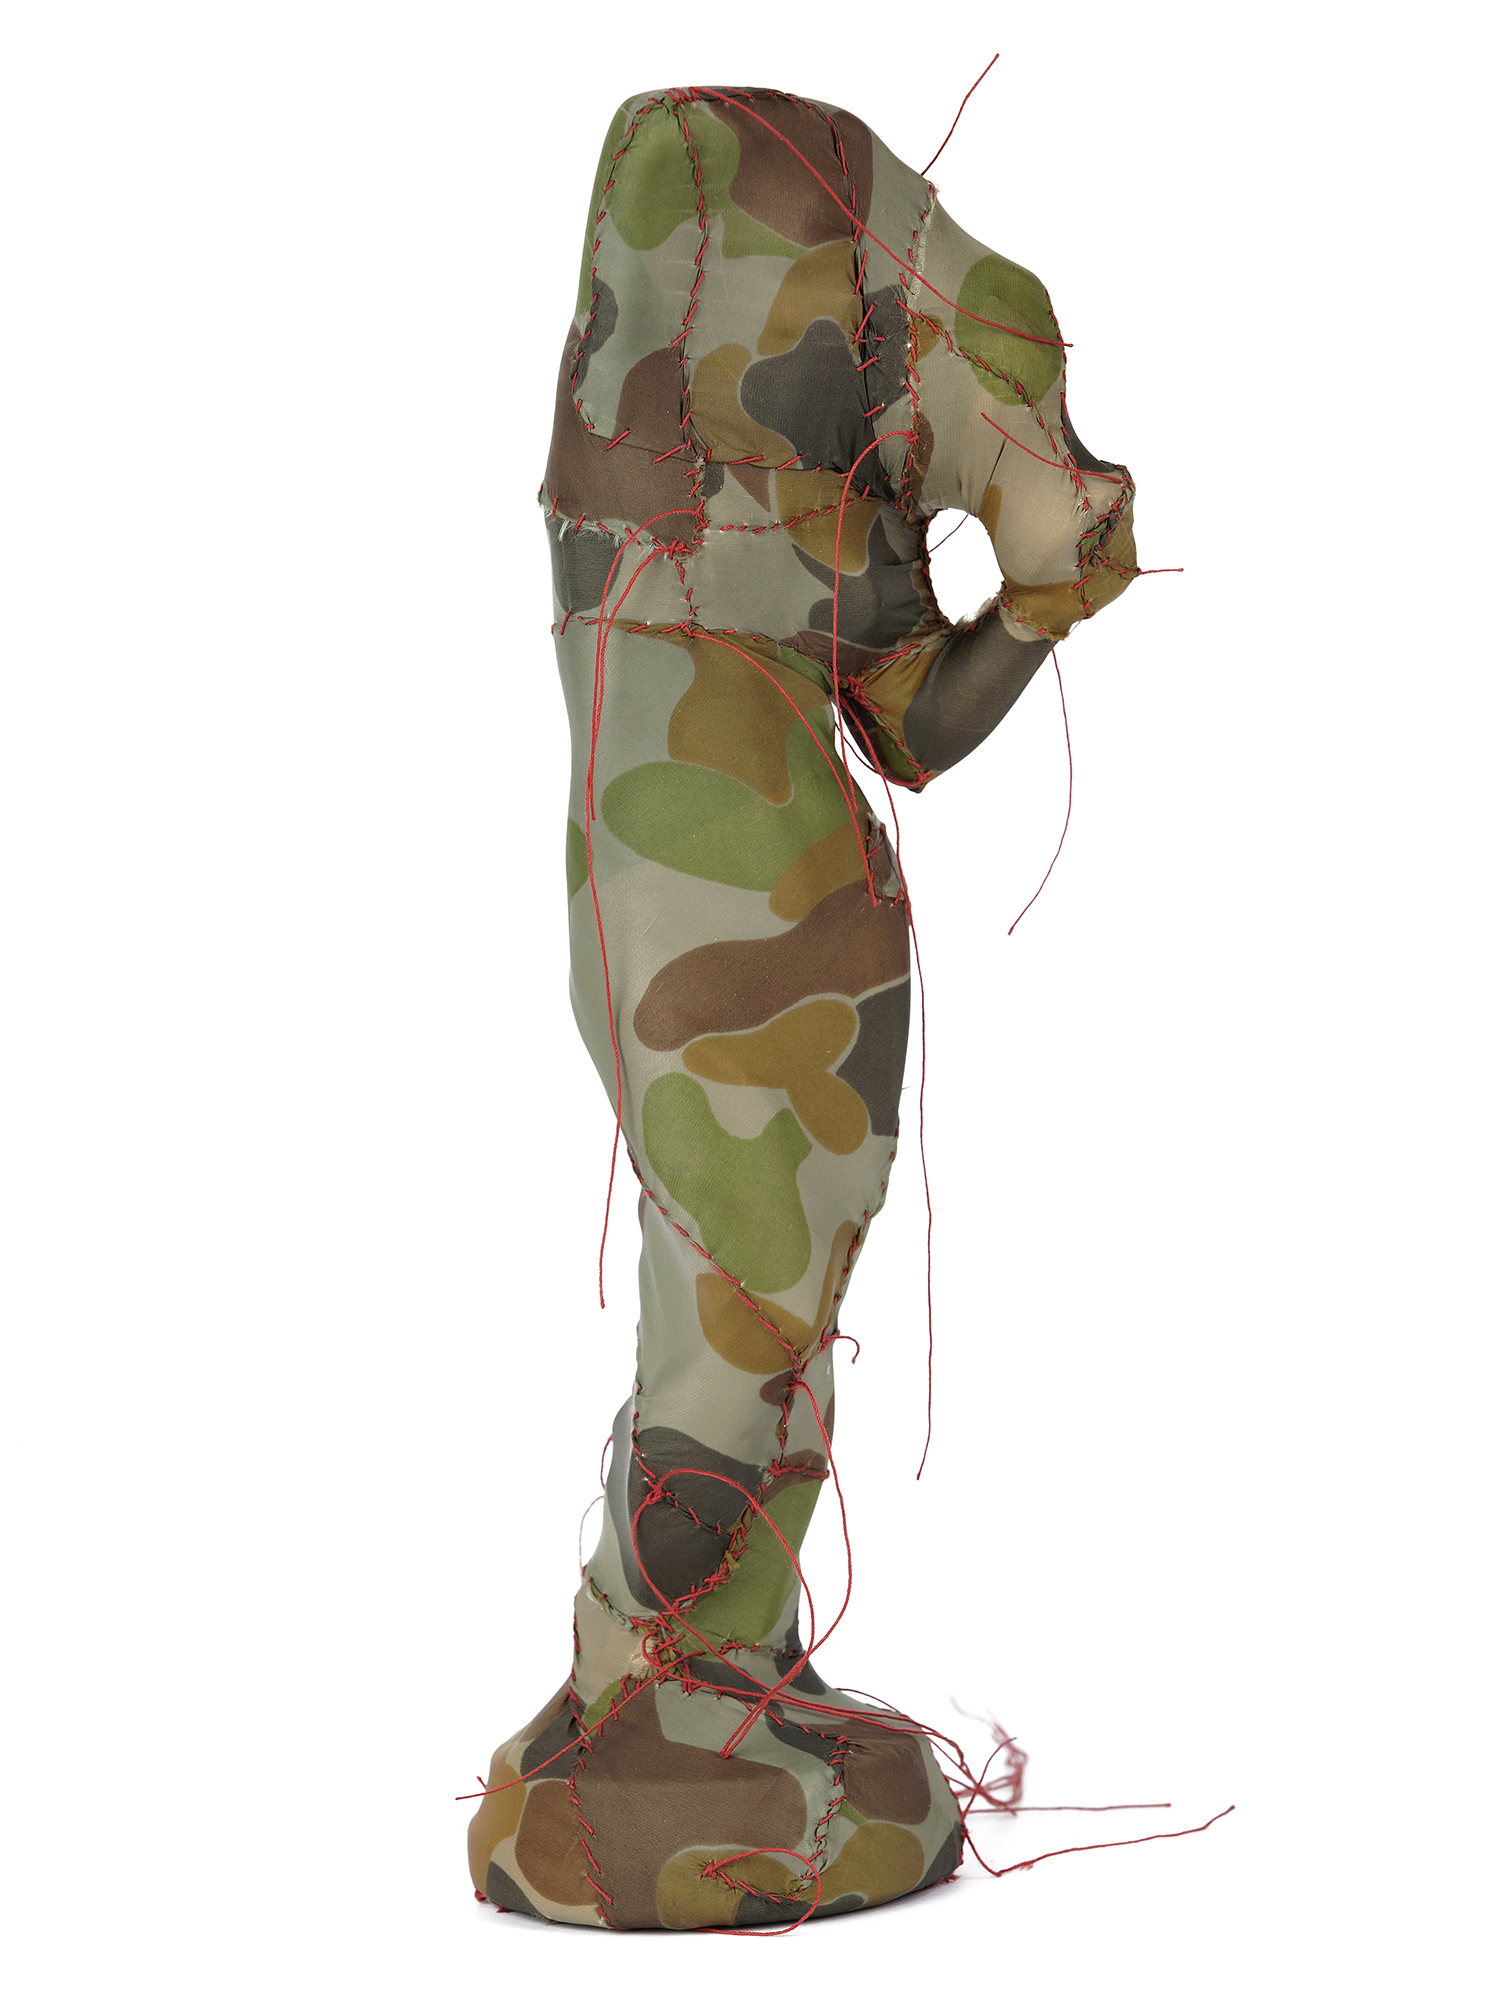 Classic statue of a figure carrying a pitcher, covered in camouflage fabric